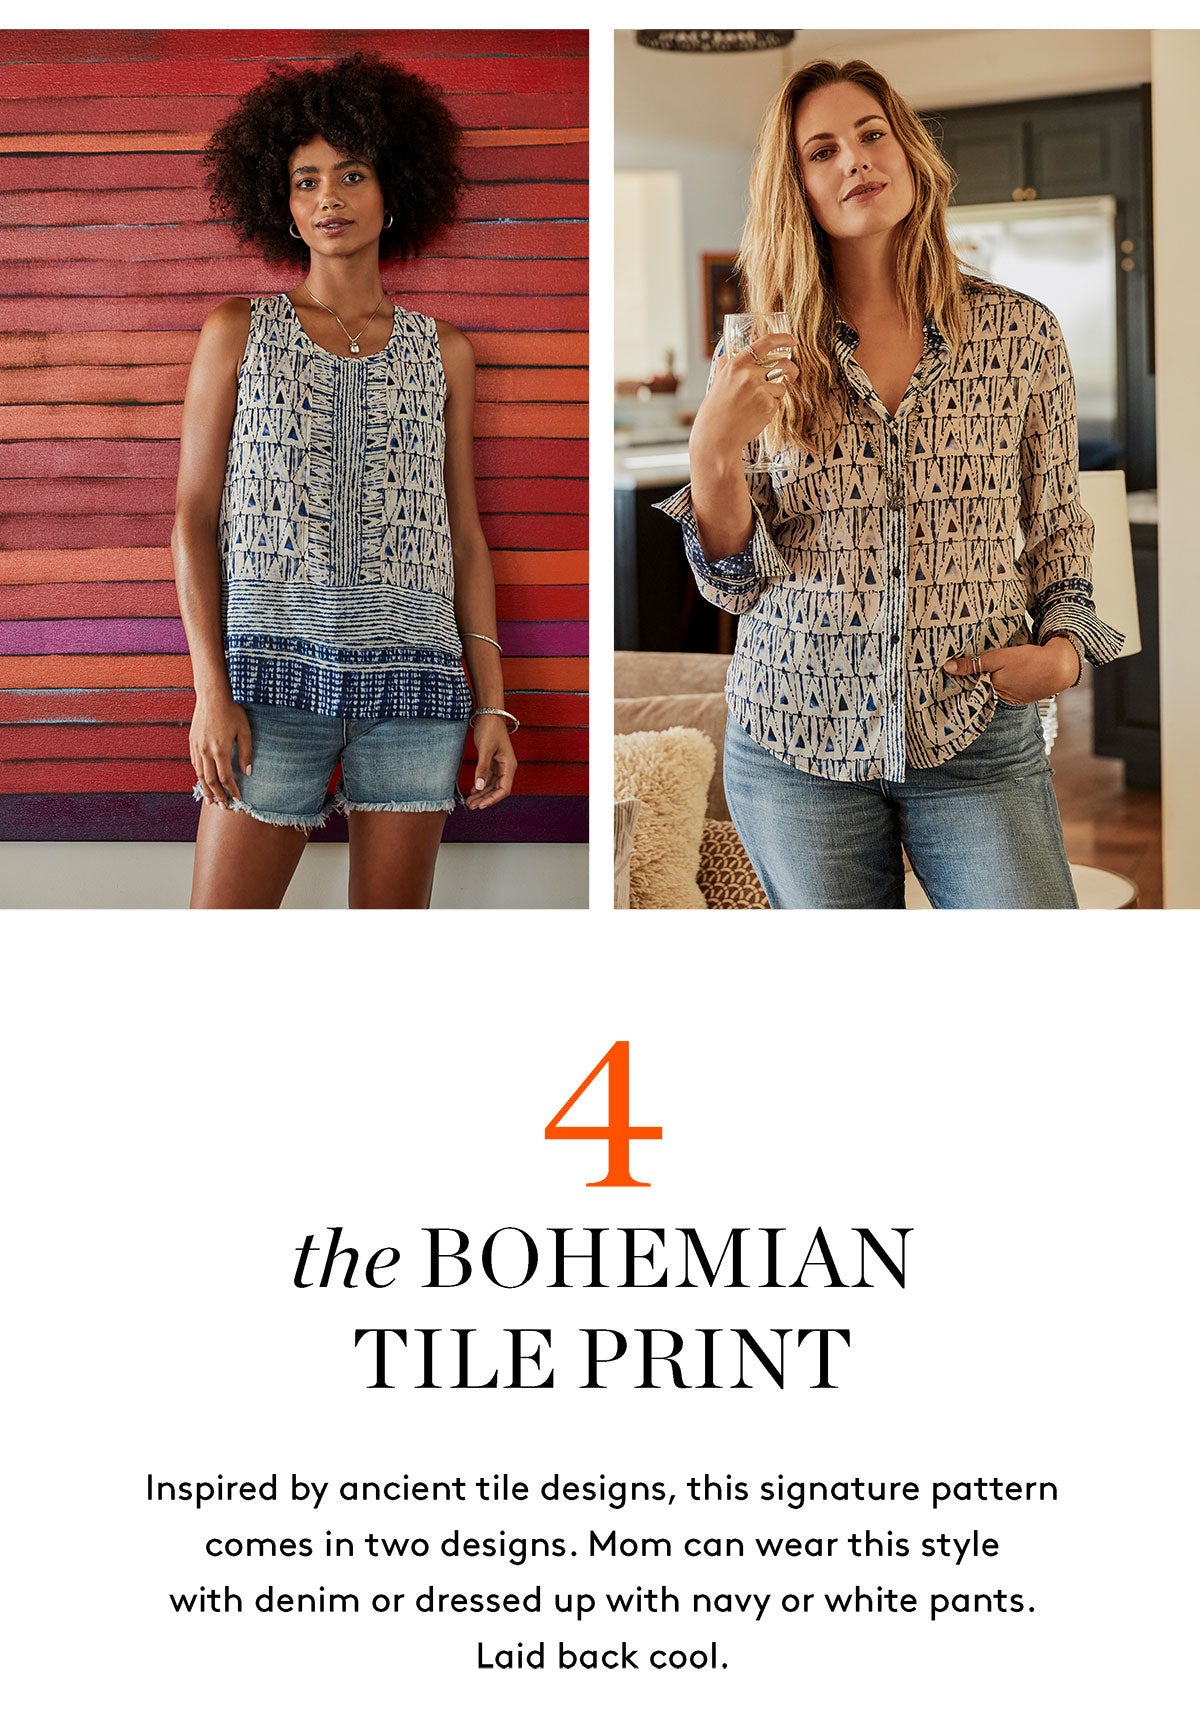 the BOHEMIAN TILE PRINT Inspired by ancient tile designs, this signature pattern comes in two designs. Mom can wear this style with denim or dressed up with navy or white pants. Laid back cool.